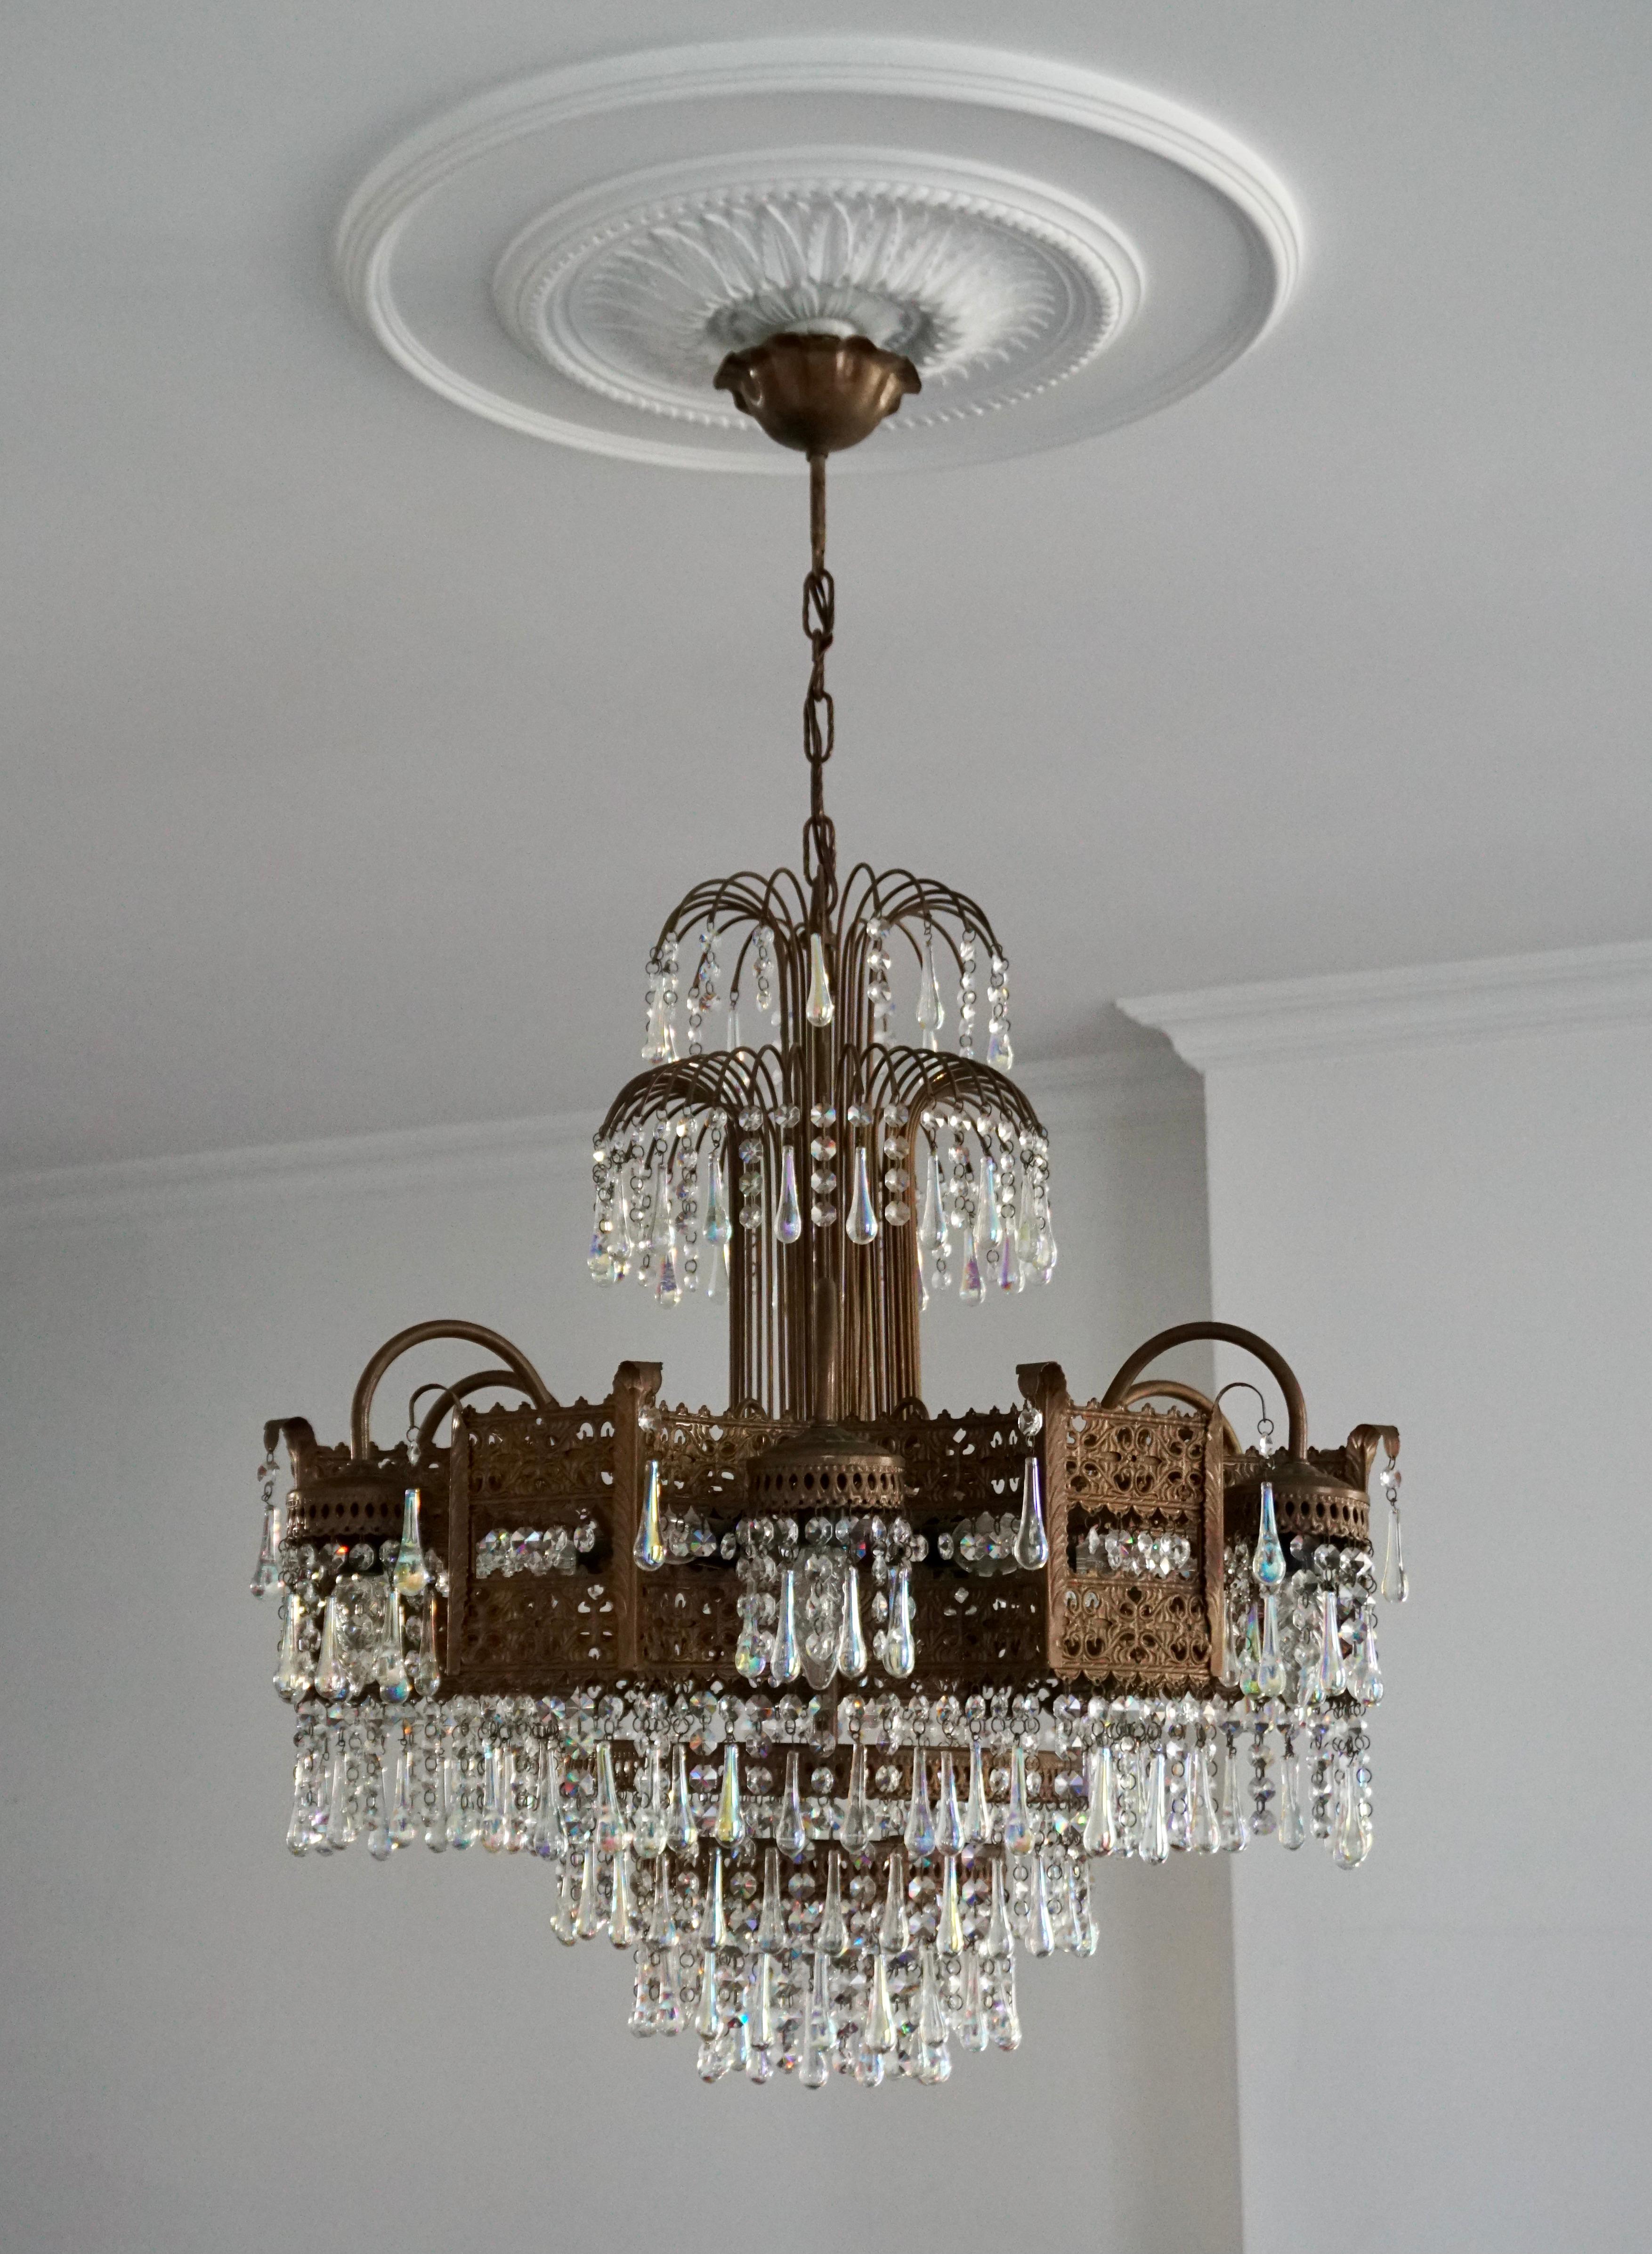 Art Deco waterfall chandelier with mother of pearl colored glass drops,
Italy, 1900-1930

The light requires twelve single E14 screw fit lightbulbs (60Watt max.) LED compatible.

Measures: Diameter 68 cm.
Height fixture 70 cm.
Total height including